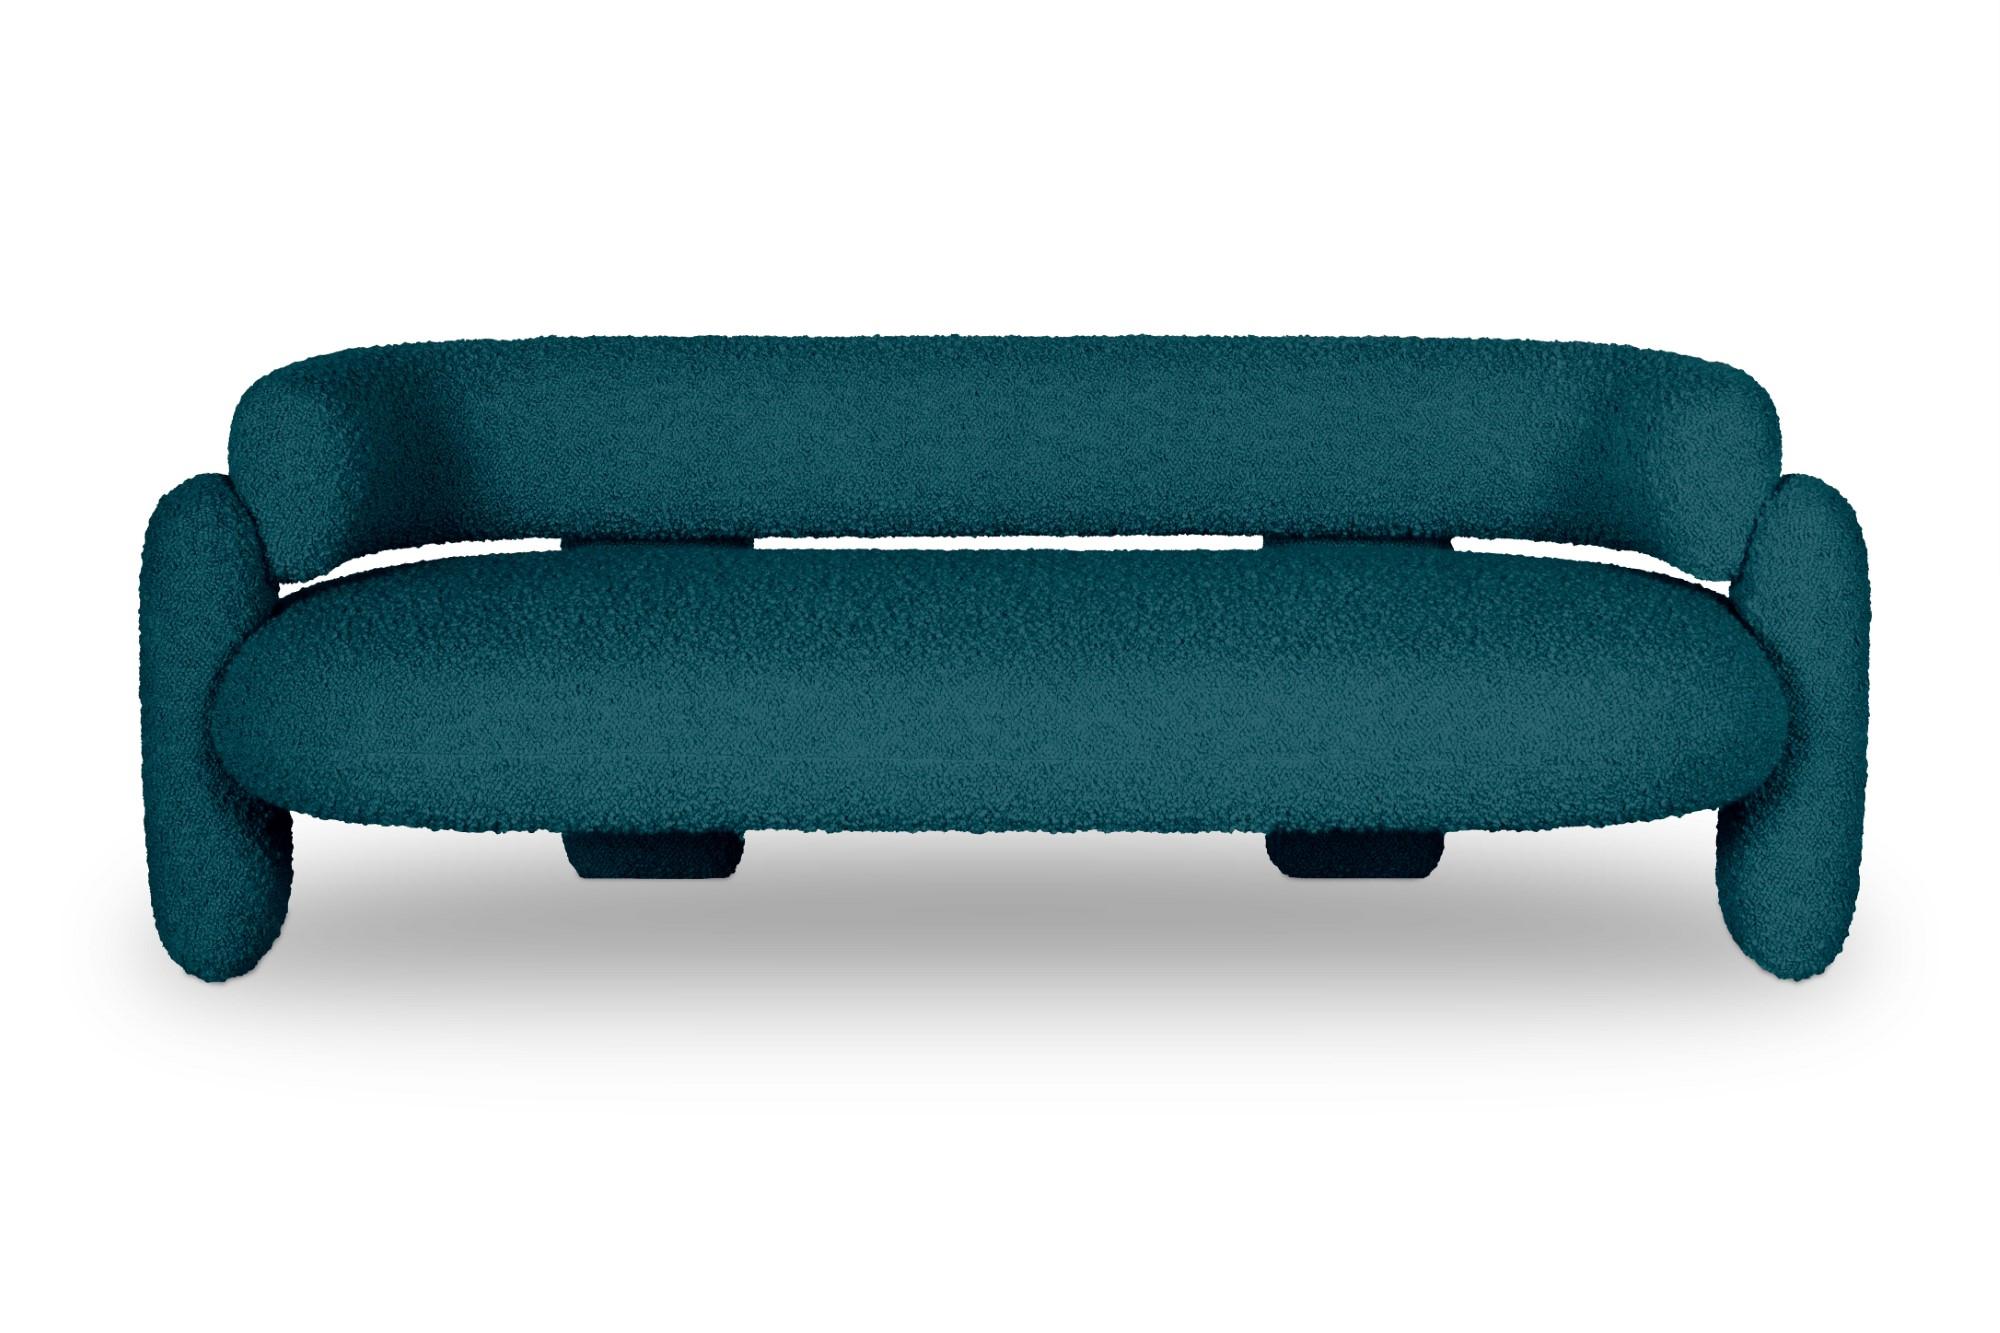 Embrace Cormo Azure Sofa by Royal Stranger.
Dimensions: W 200 x H 70 x D 90 cm. Seat Height 47 cm.
Materials: solid wood frame, foam, upholstery.
Available in other Royal Stranger’s fabrics and in COM.

Embrace Sofa is fond of neat lines. It